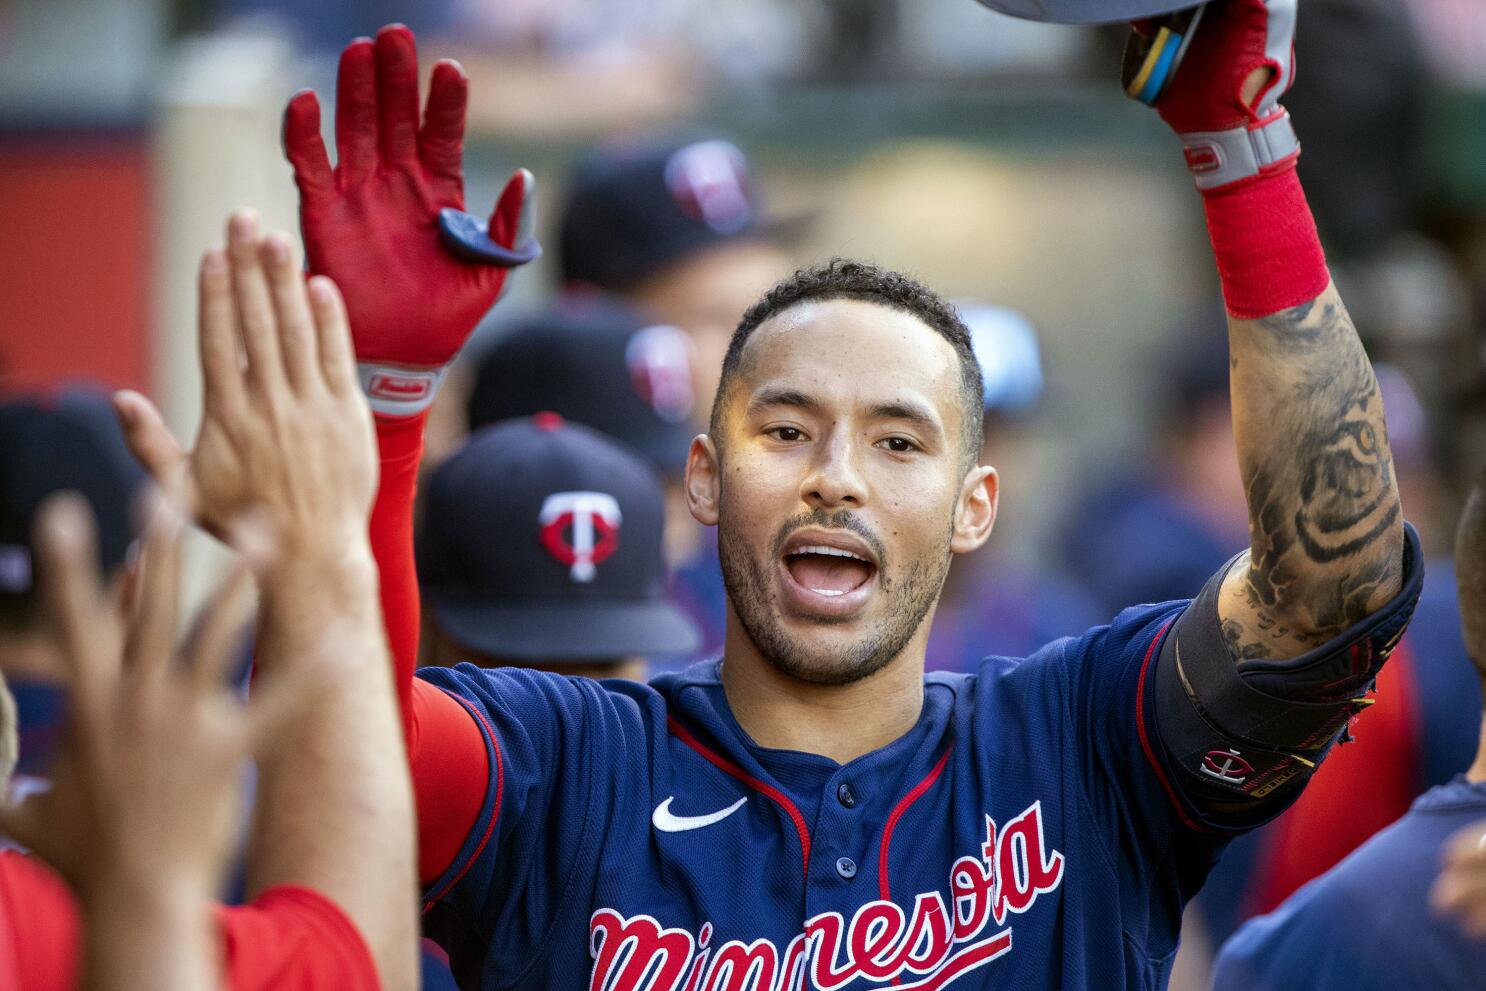 Carlos Correa Agrees to $105.3 Million Contract With Twins - The